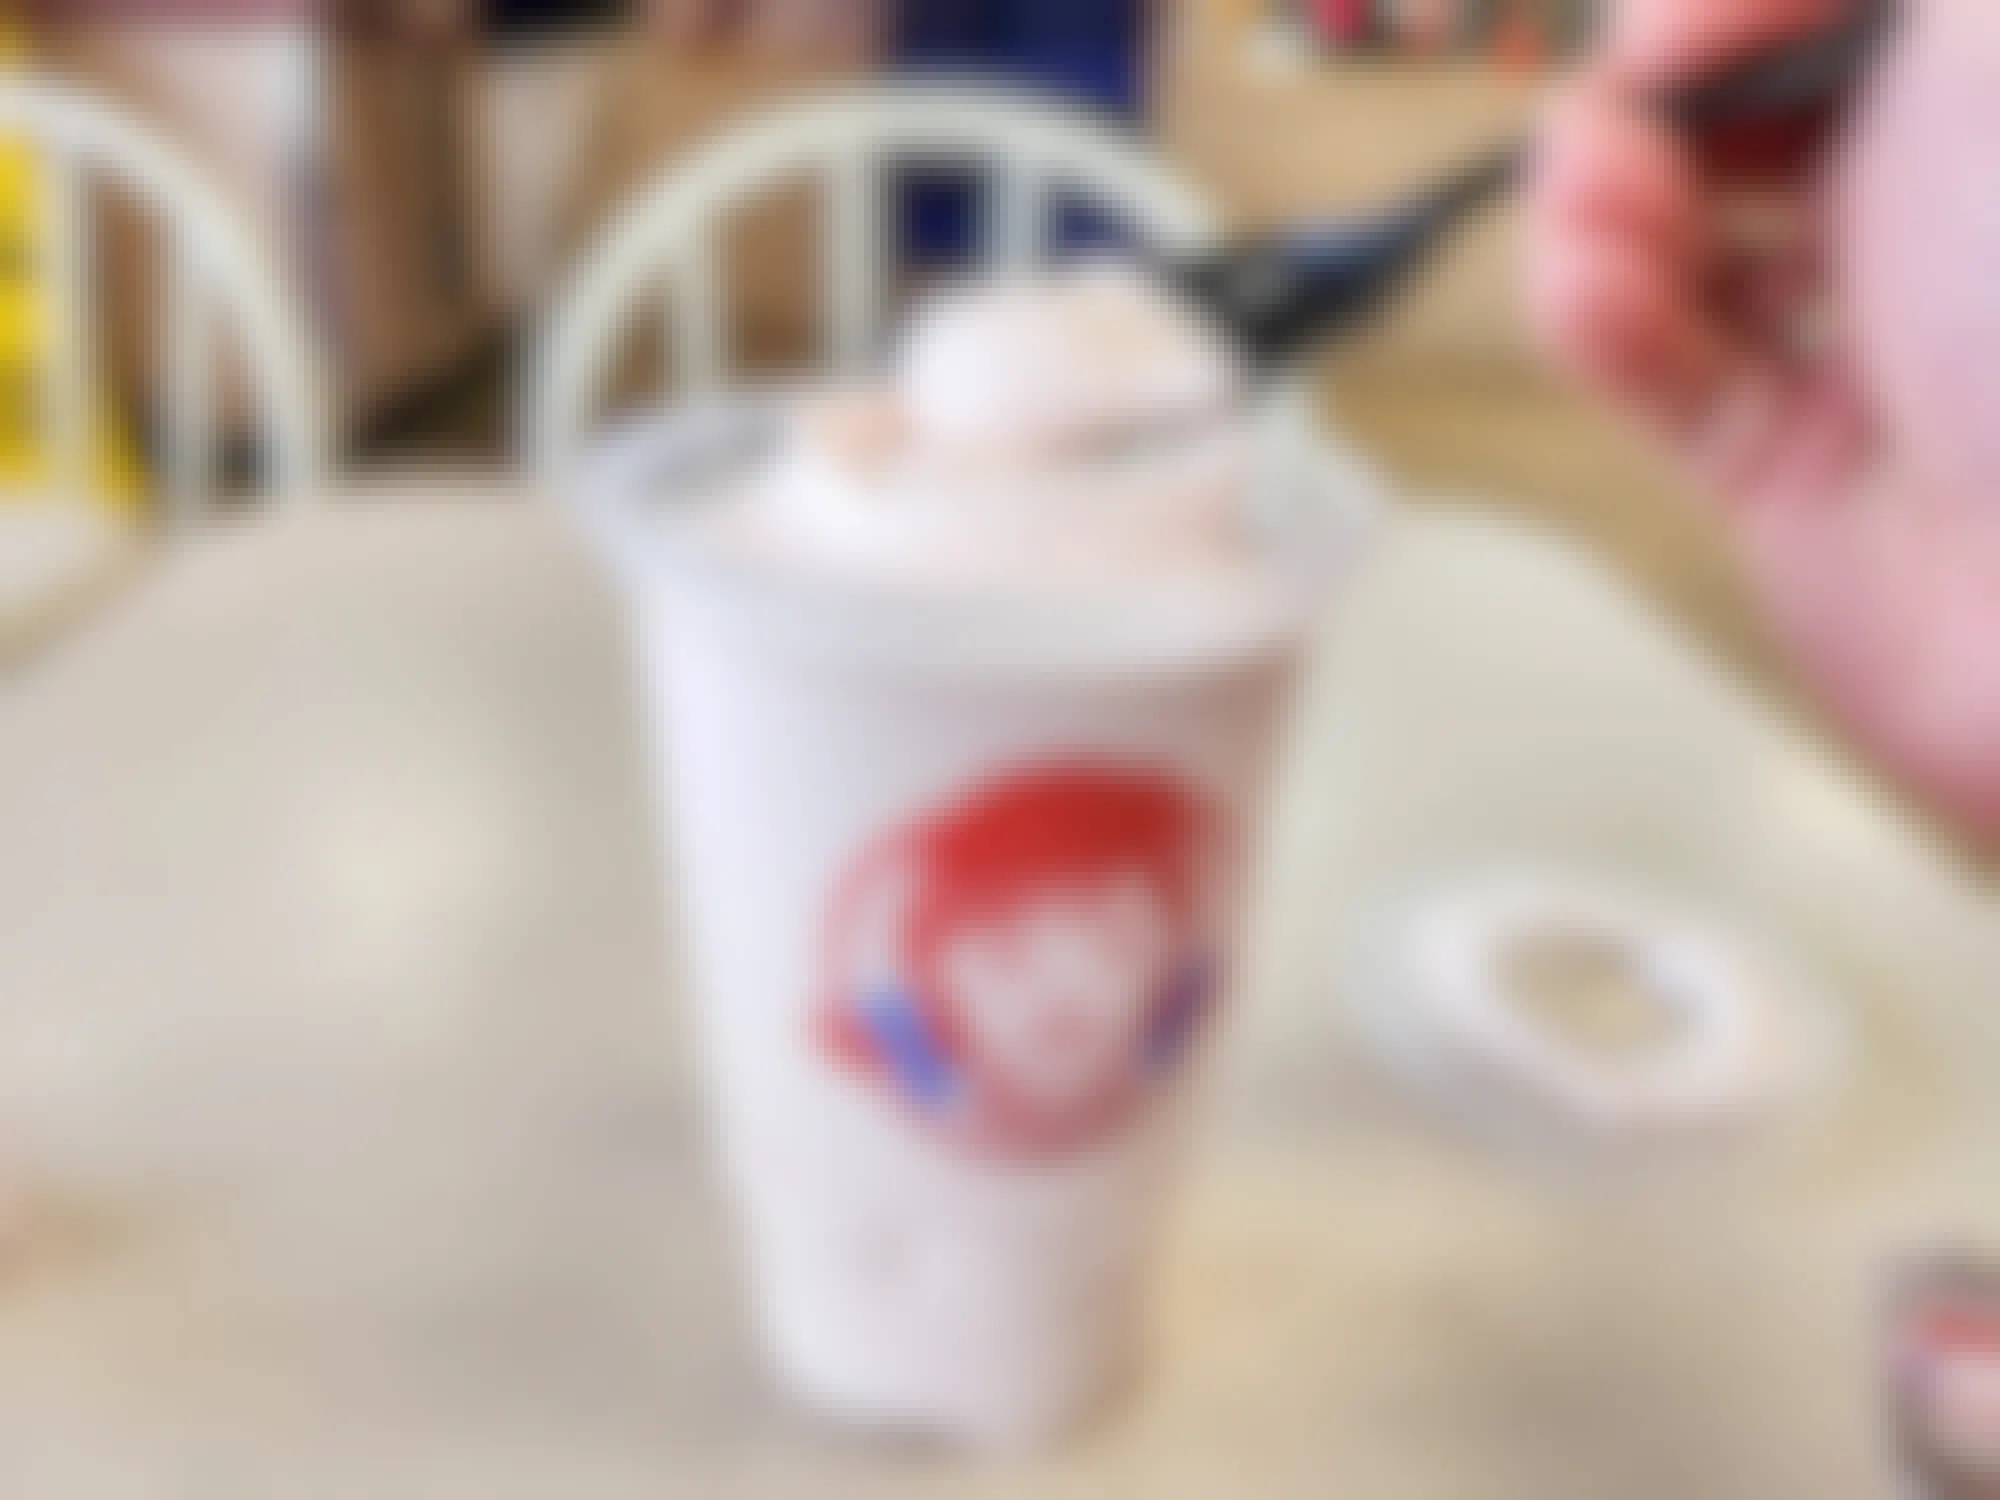 Wendy's Strawberry Frosty Returns With More Summer Menu Items